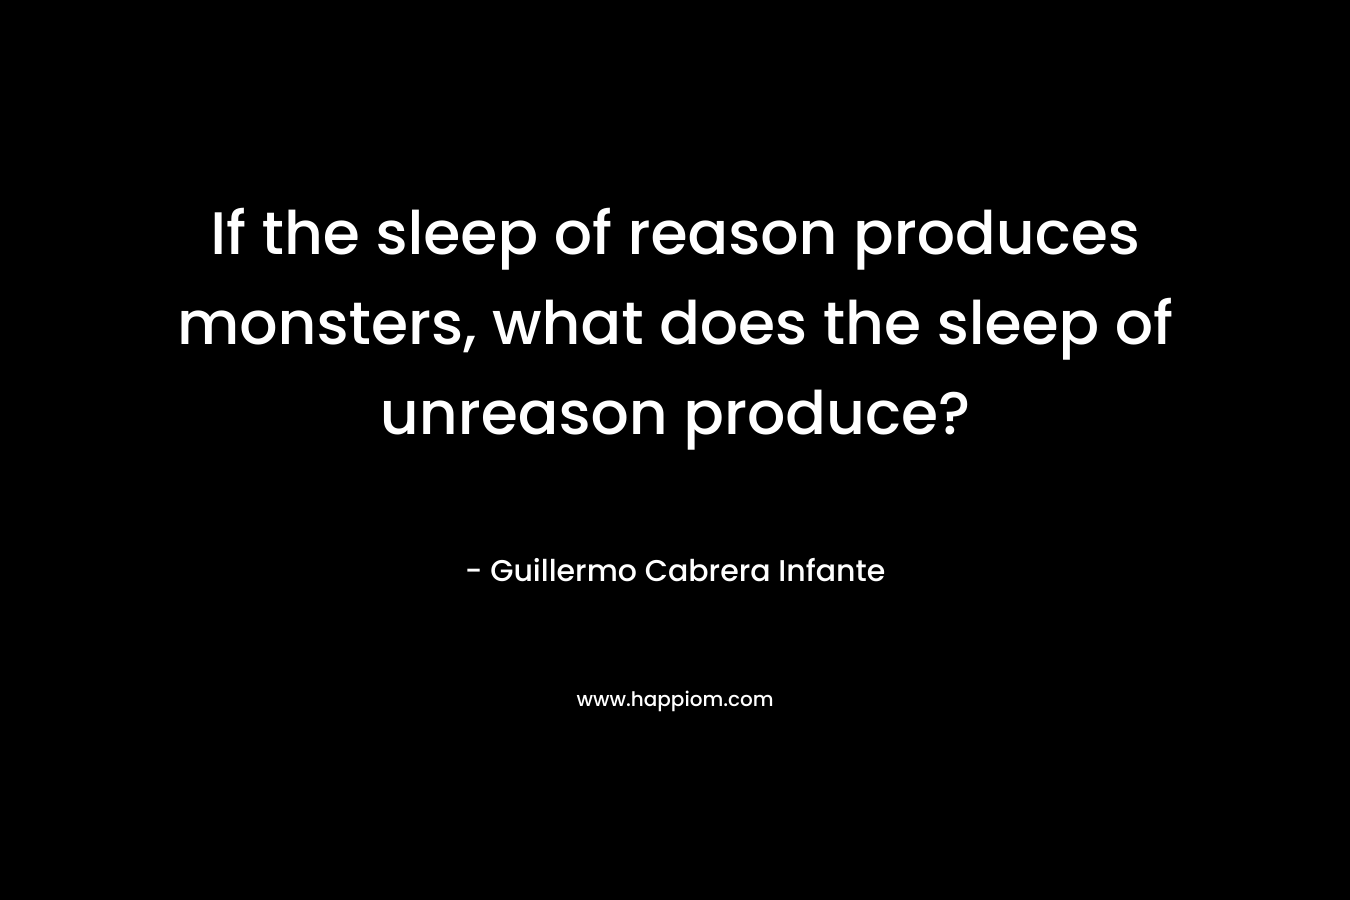 If the sleep of reason produces monsters, what does the sleep of unreason produce?